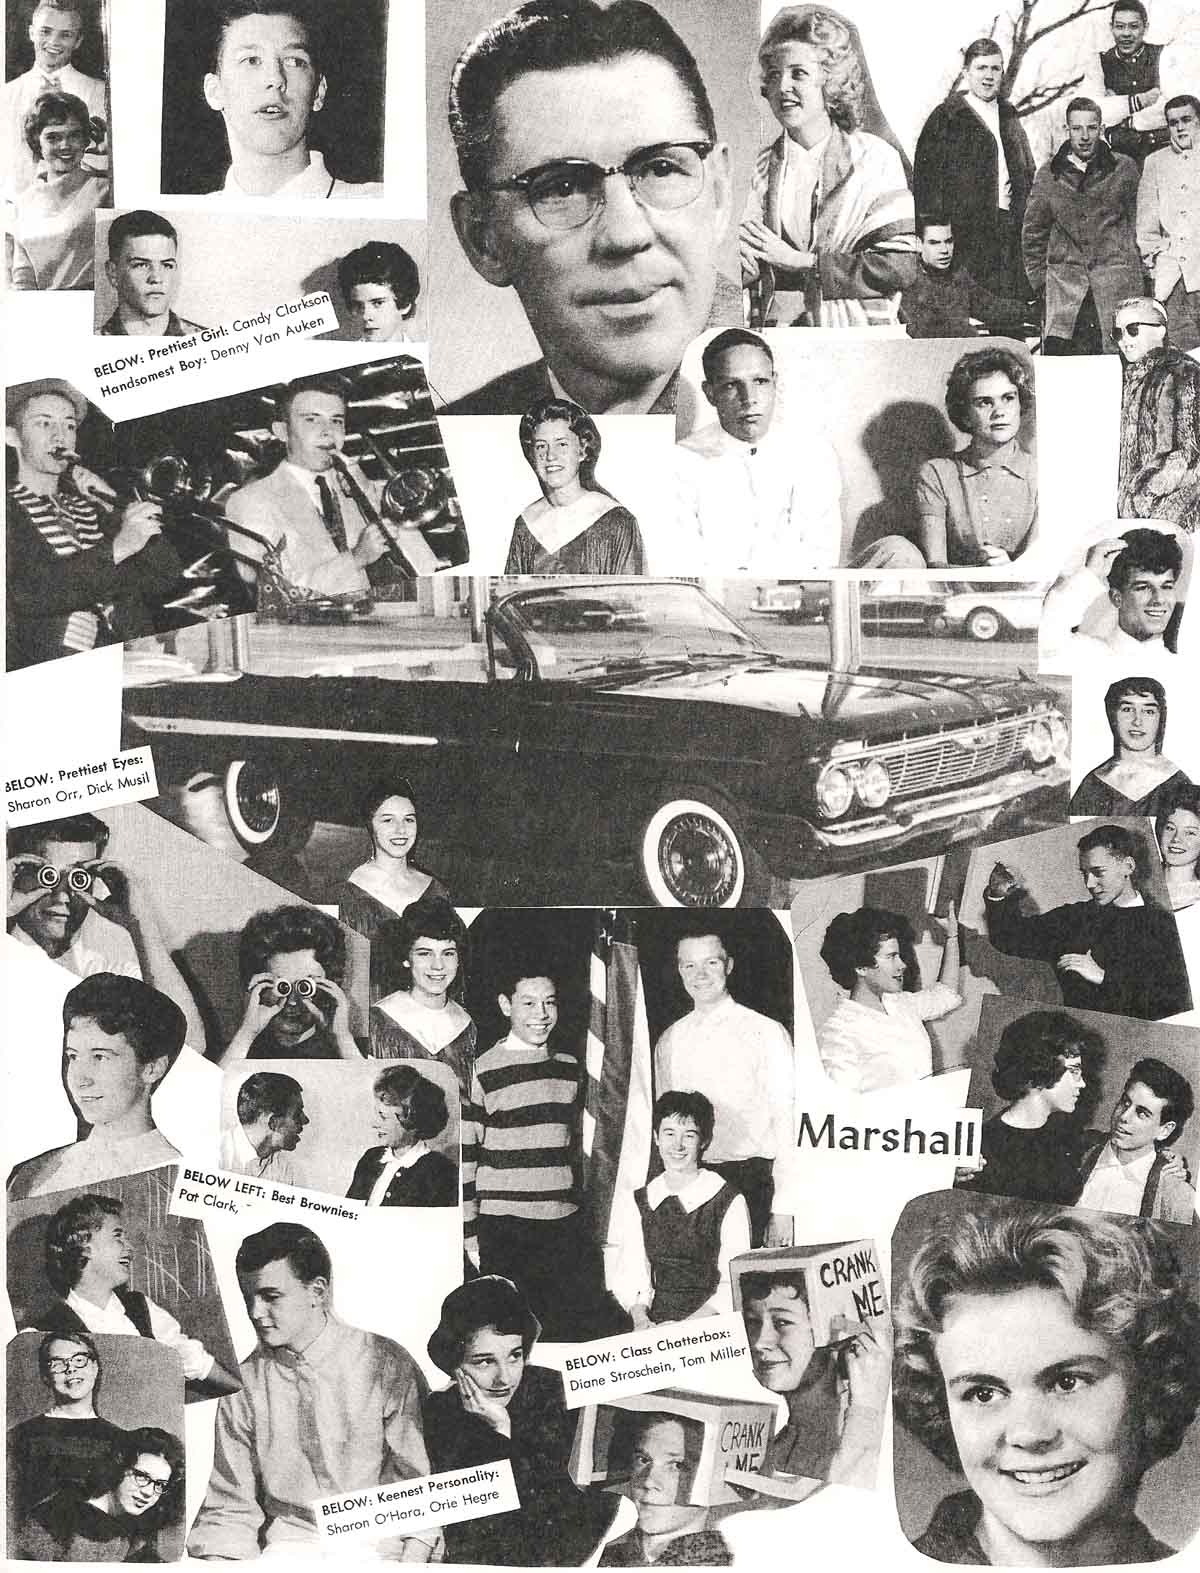 Marshall HS Yearbook Photos collage